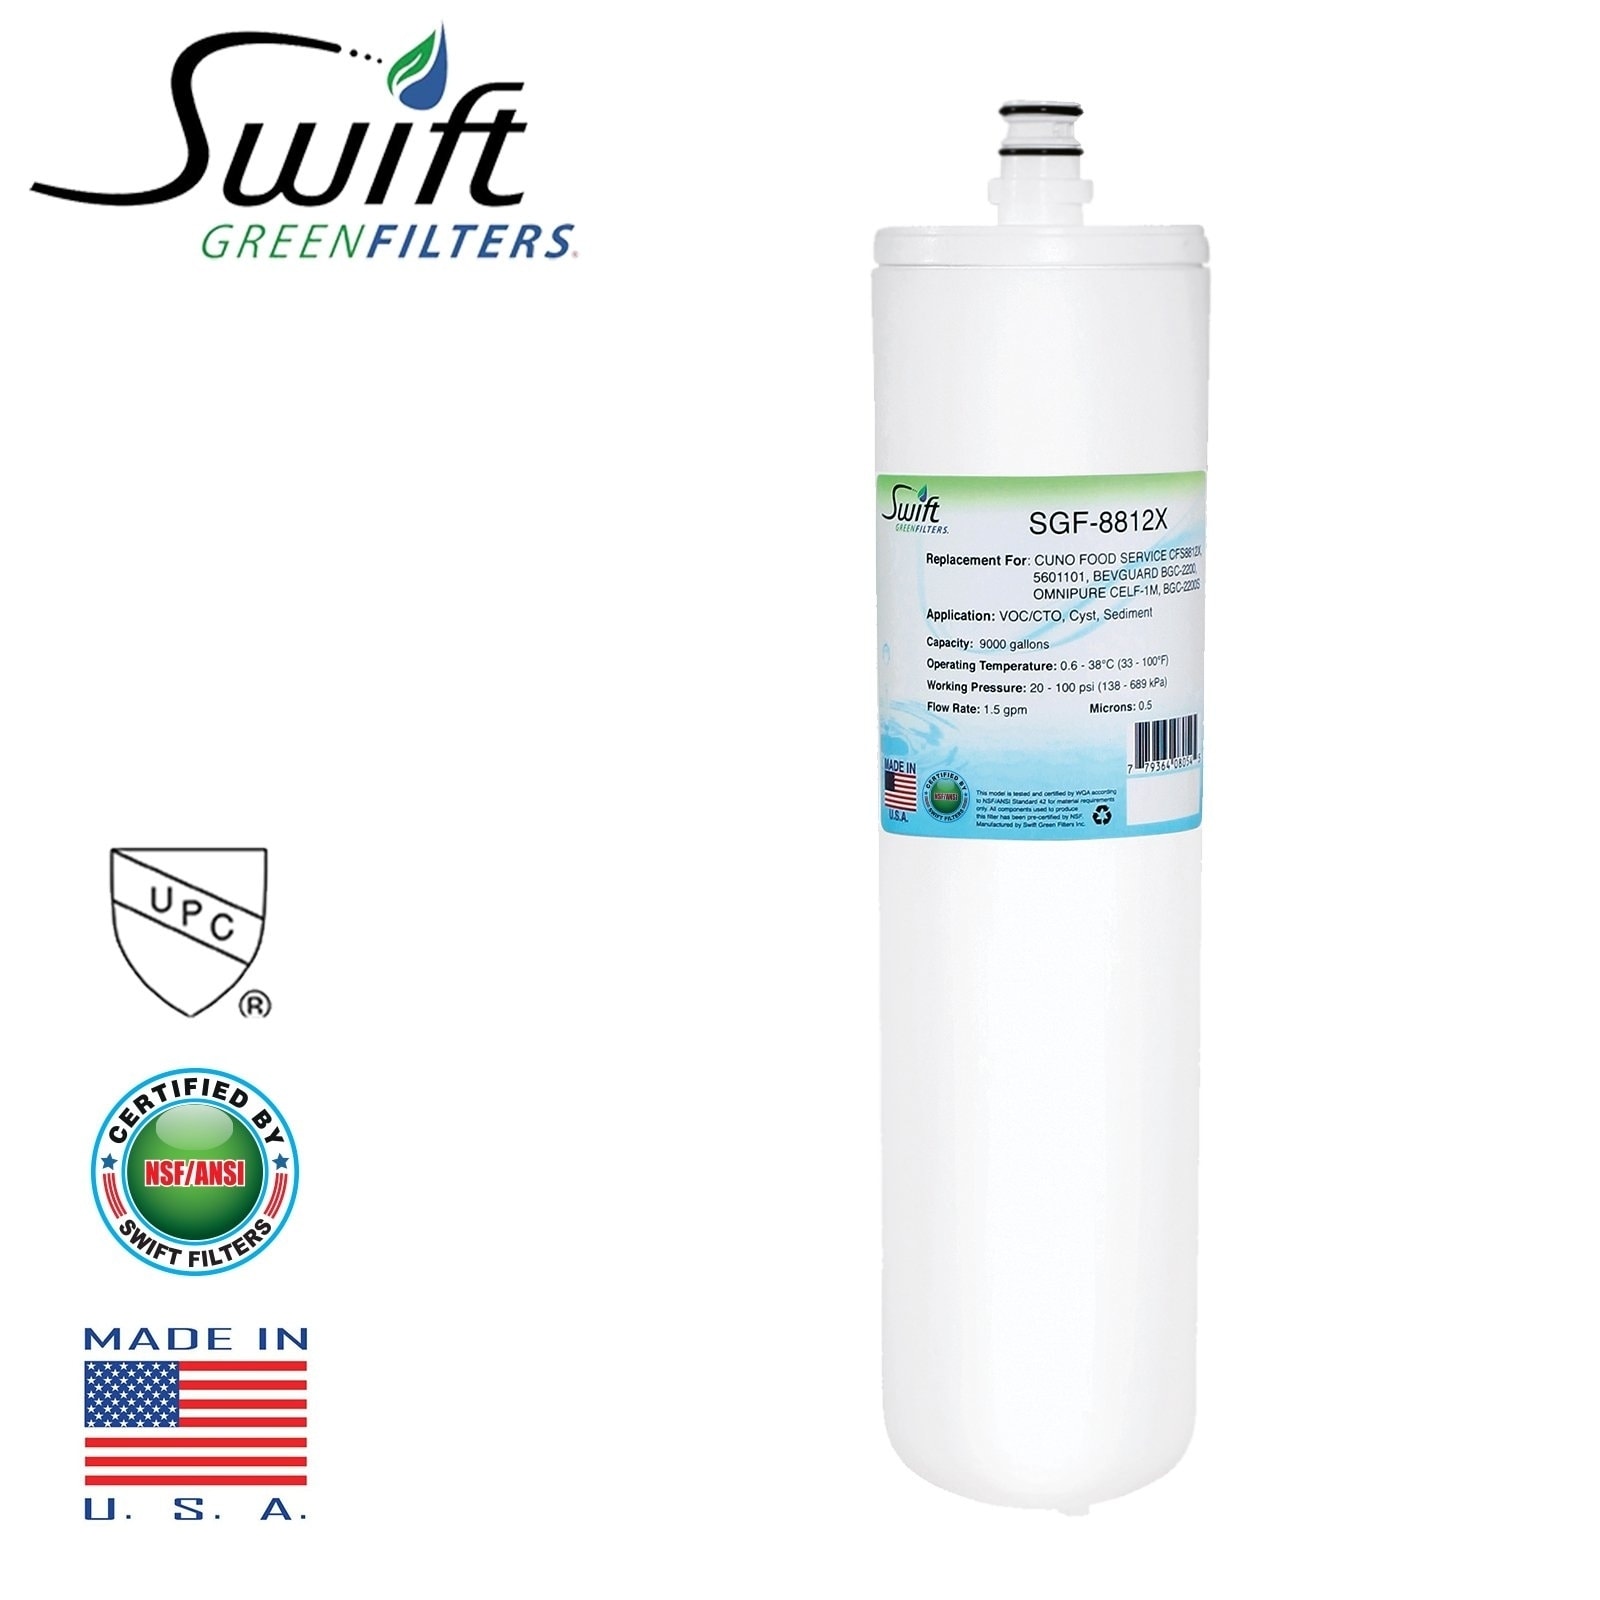 Replacement for 3M CFS8812X Filter by Swift Green Filters SGF-8812X - White